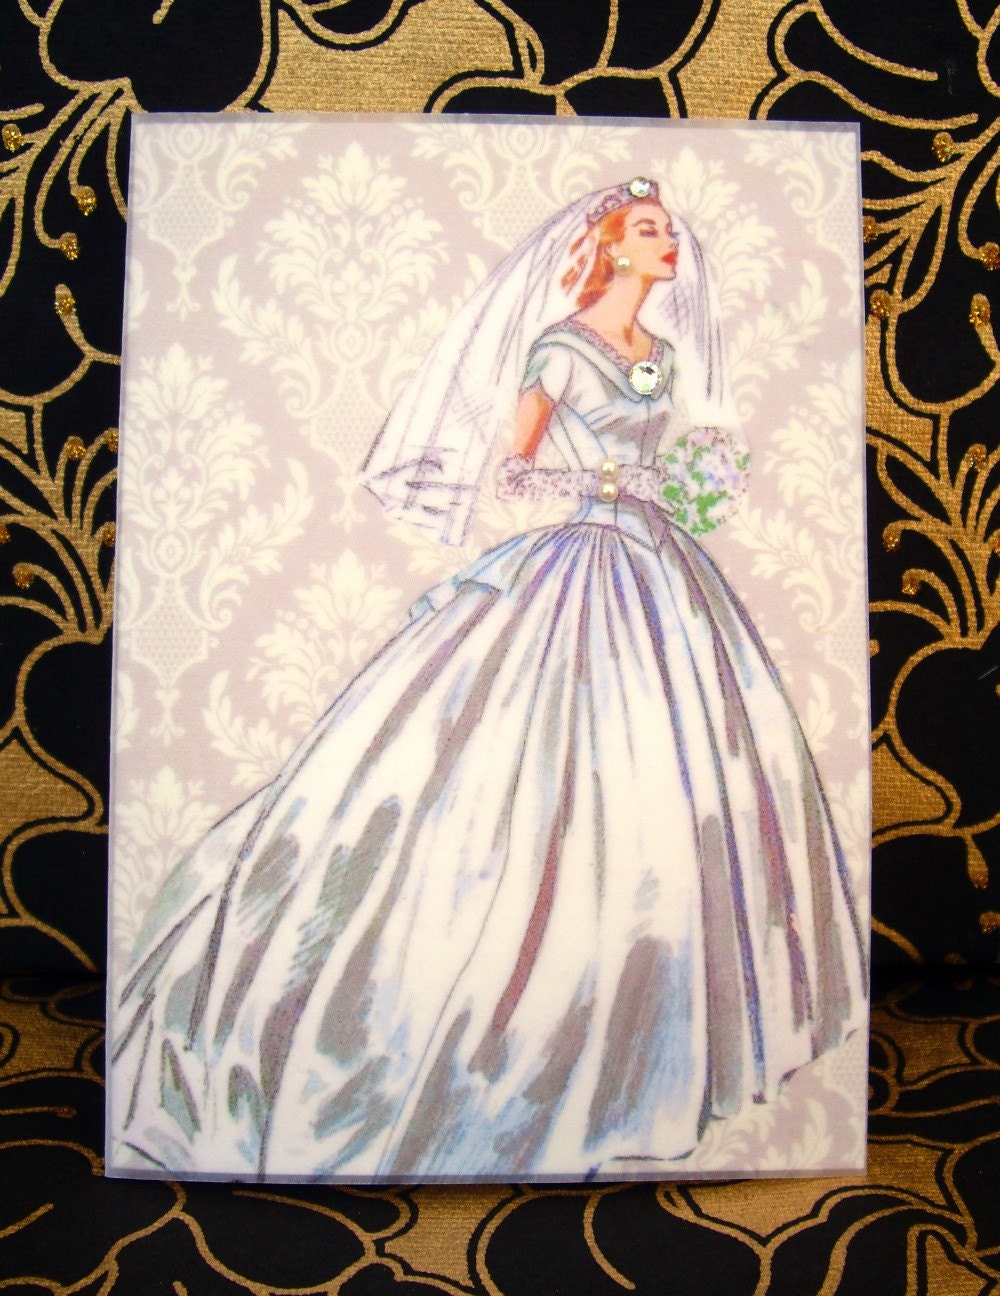 Kathryn Wedding Card / Vintage Printed Collection / 50s Glamour Girl / Handmade Greeting Card